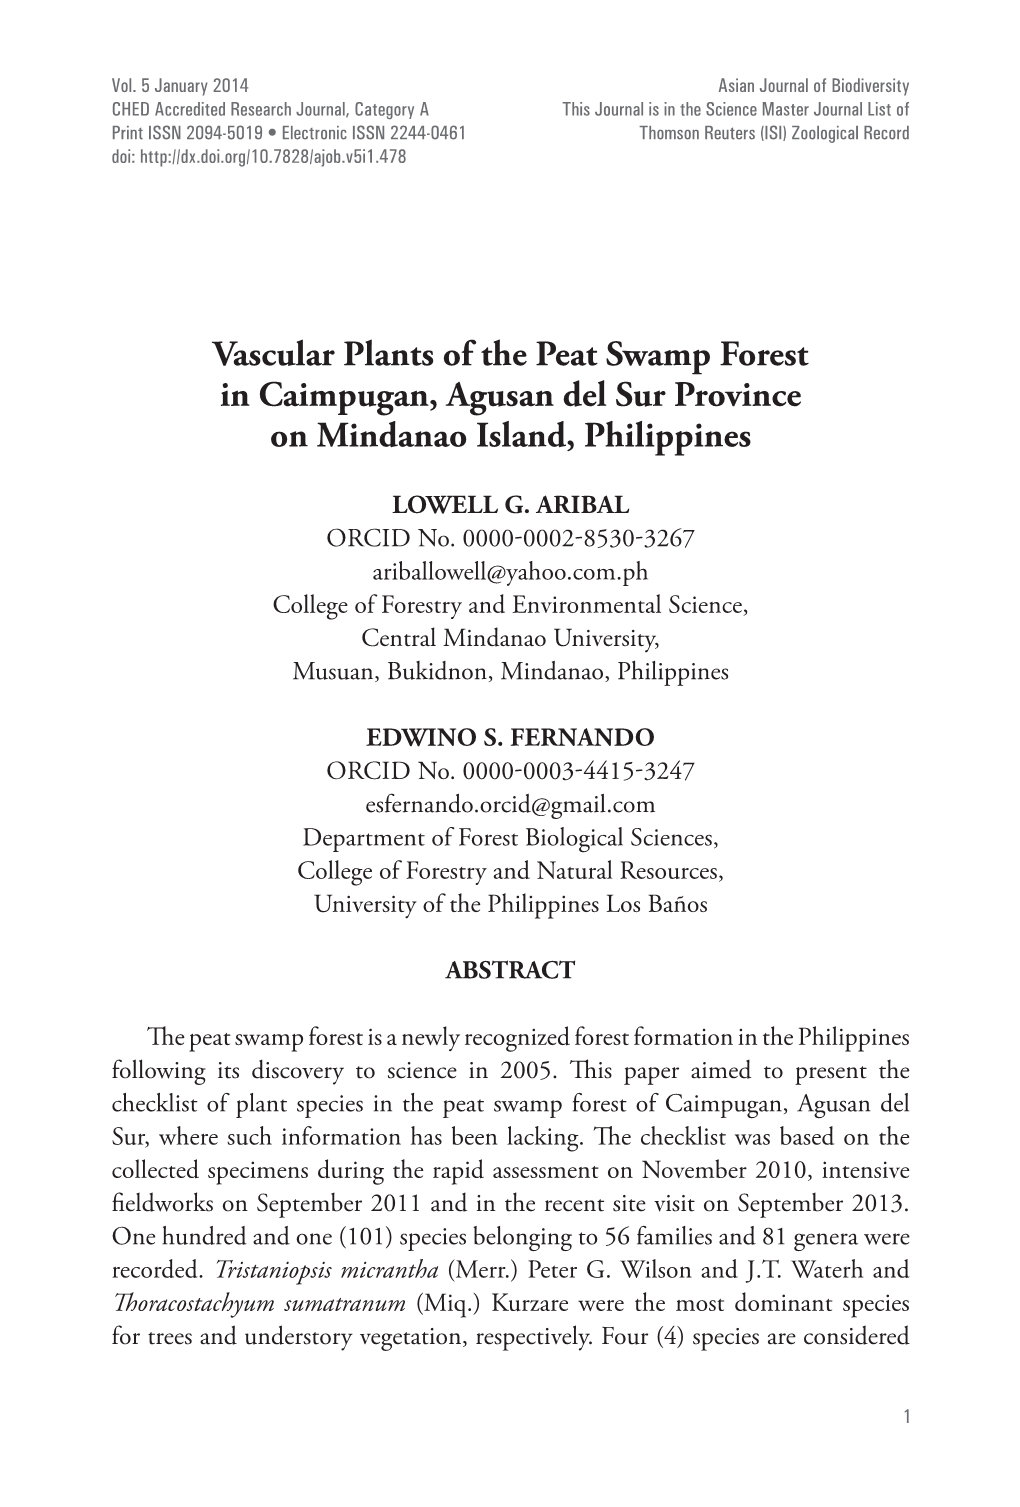 Vascular Plants of the Peat Swamp Forest in Caimpugan, Agusan Del Sur Province on Mindanao Island, Philippines